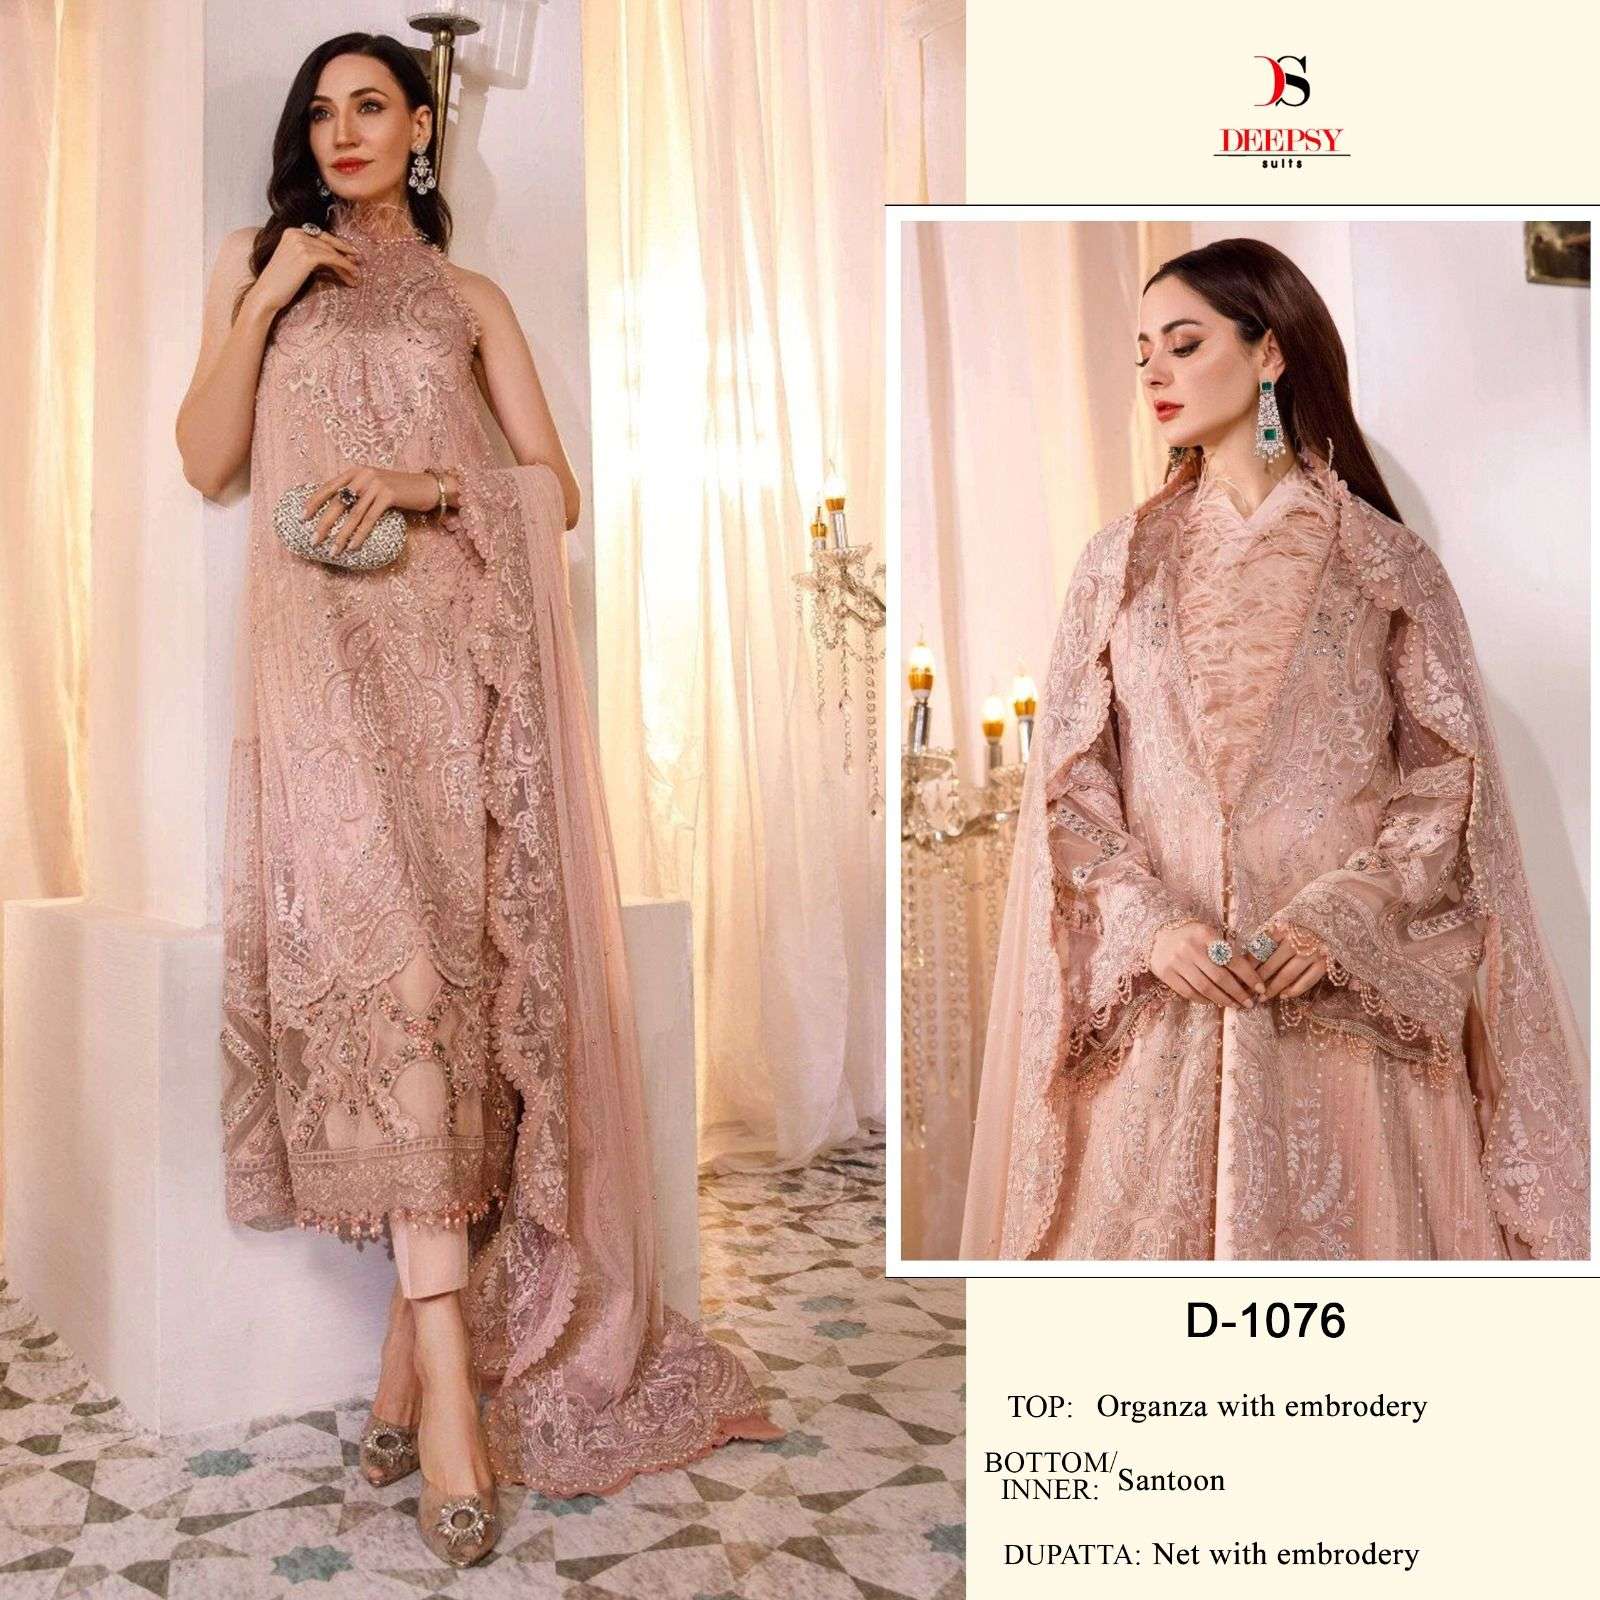 Deepsy Suits 1076 Organza With Embroidery work Pakistani sal...